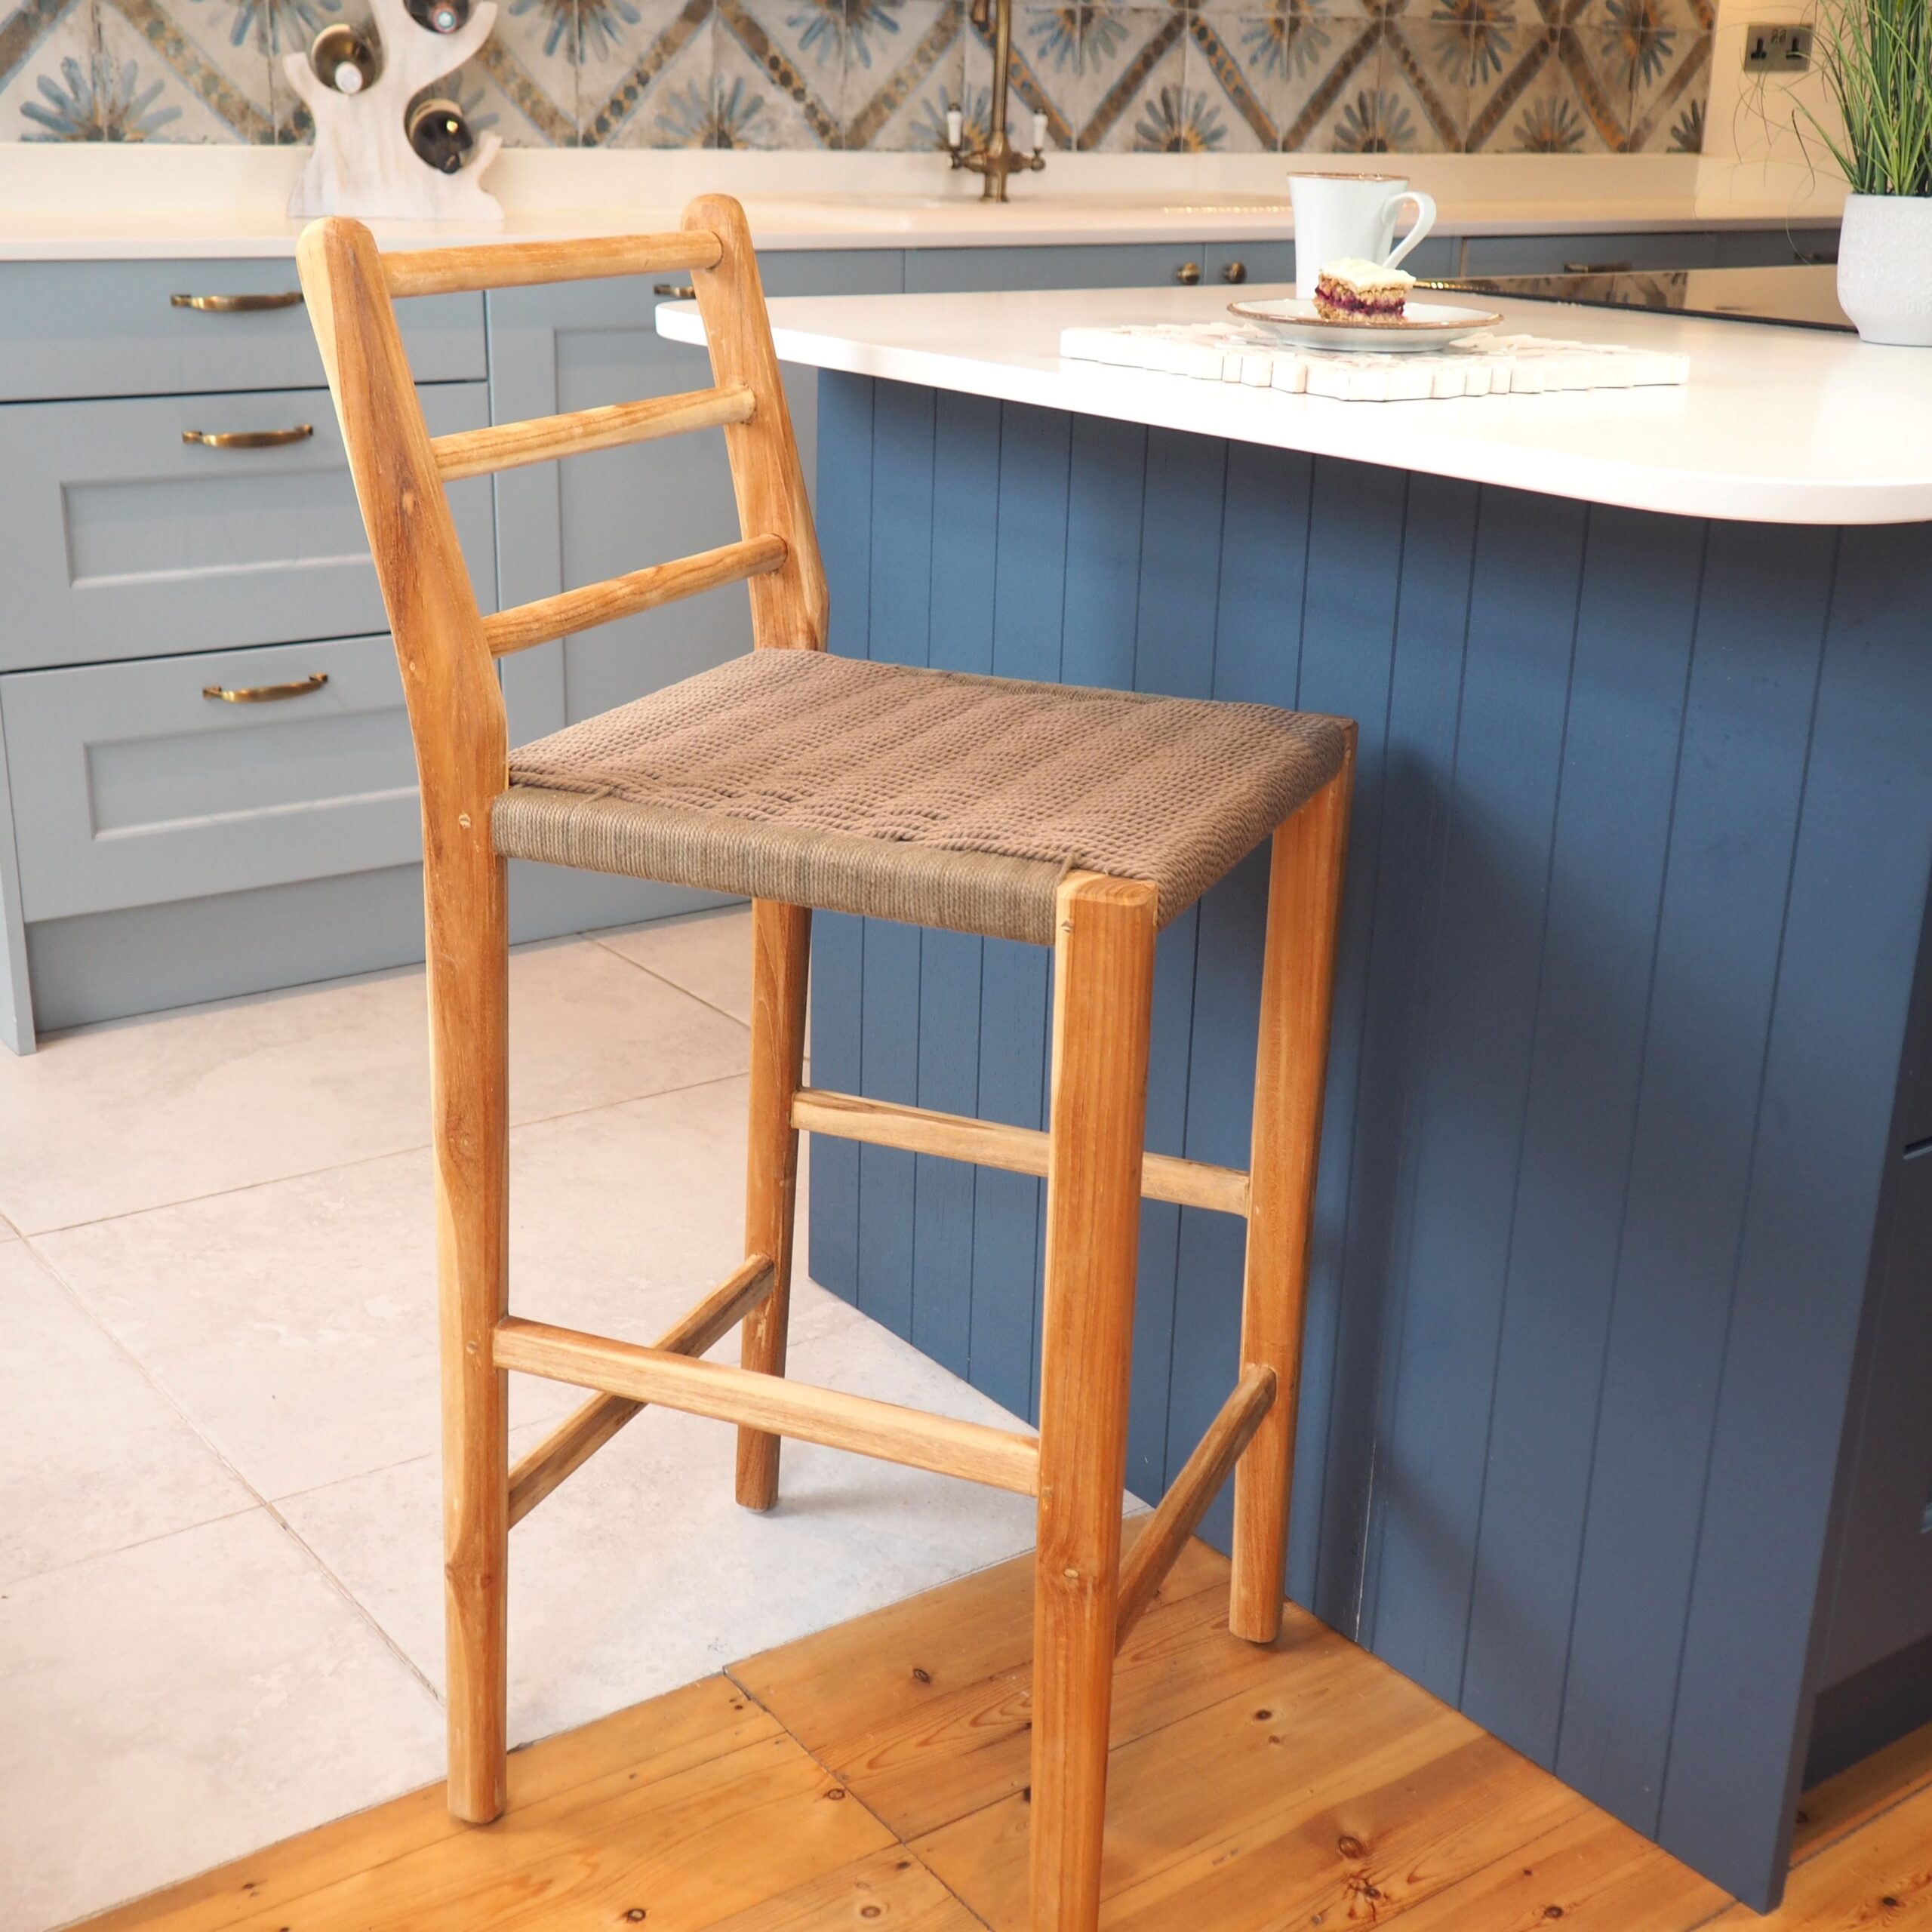 Natural wicker stool in front of blue kitchen island